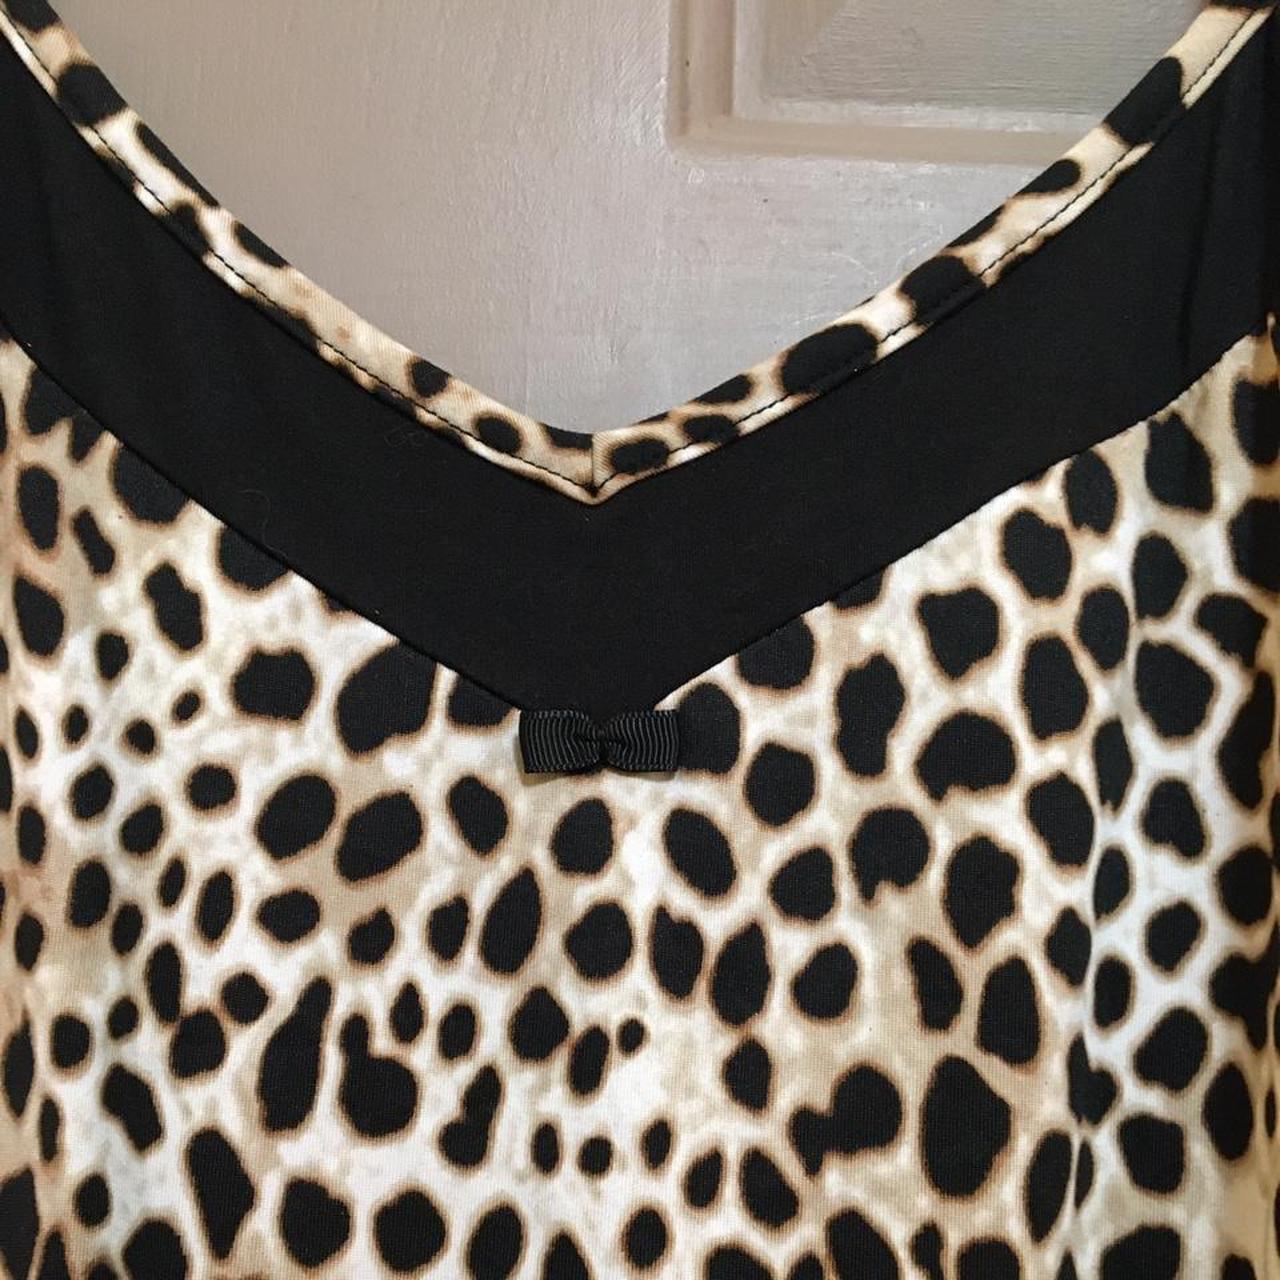 Product Image 3 - NWTs Soft Spotted Leopard/Cheetah Print